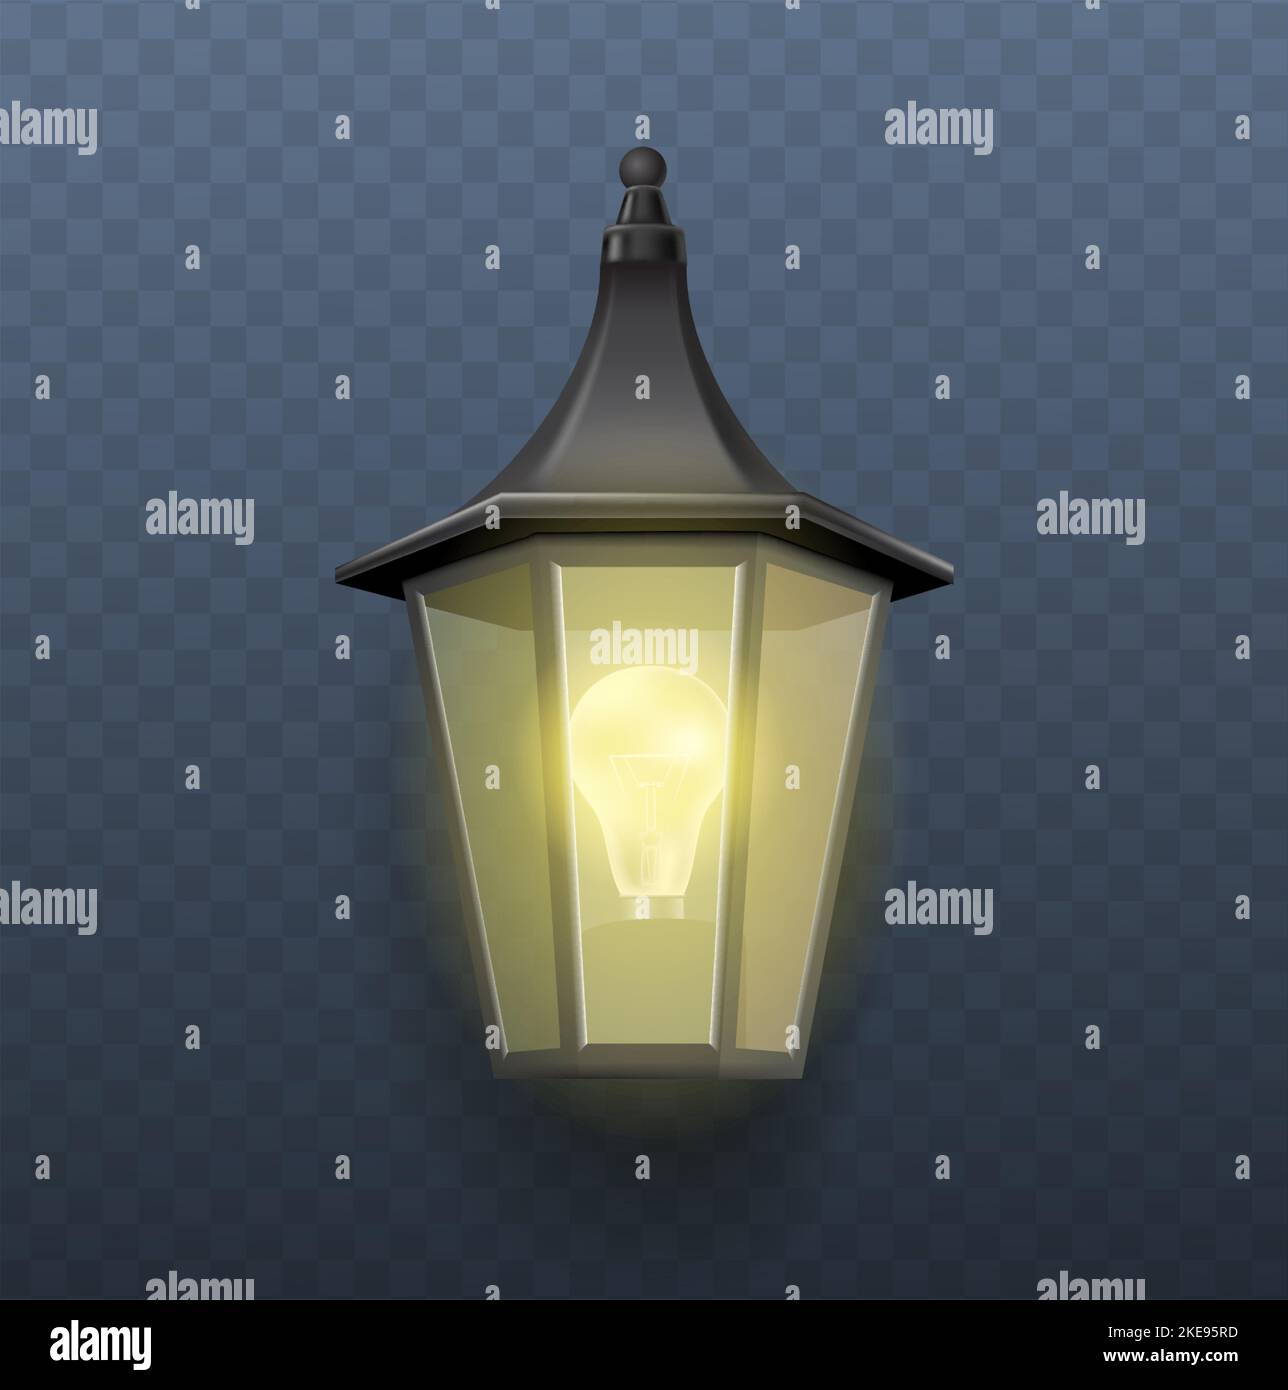 realistic vector icon. Outdoor wall garden light lamp. Street light. Old style metal electricity lamp. Stock Vector